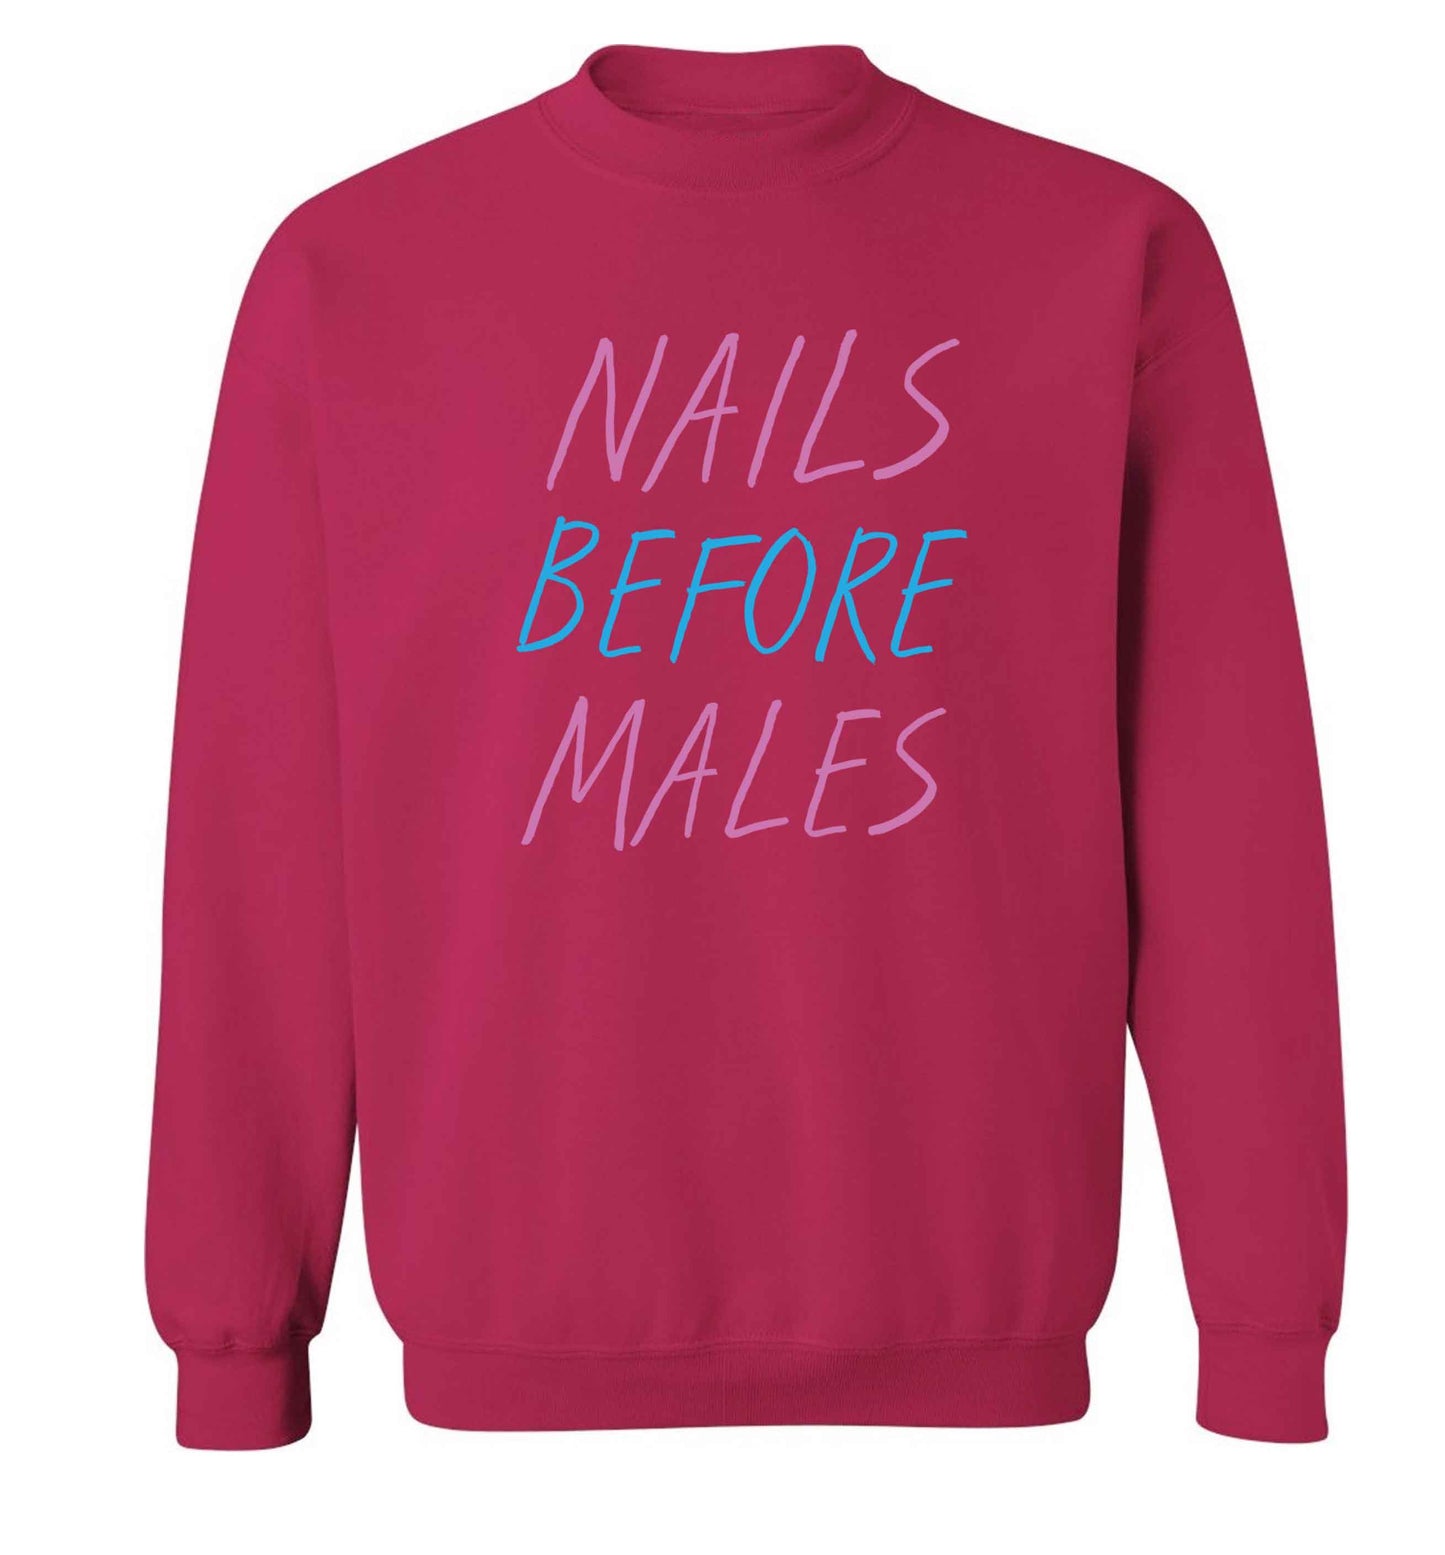 Nails before males adult's unisex pink sweater 2XL